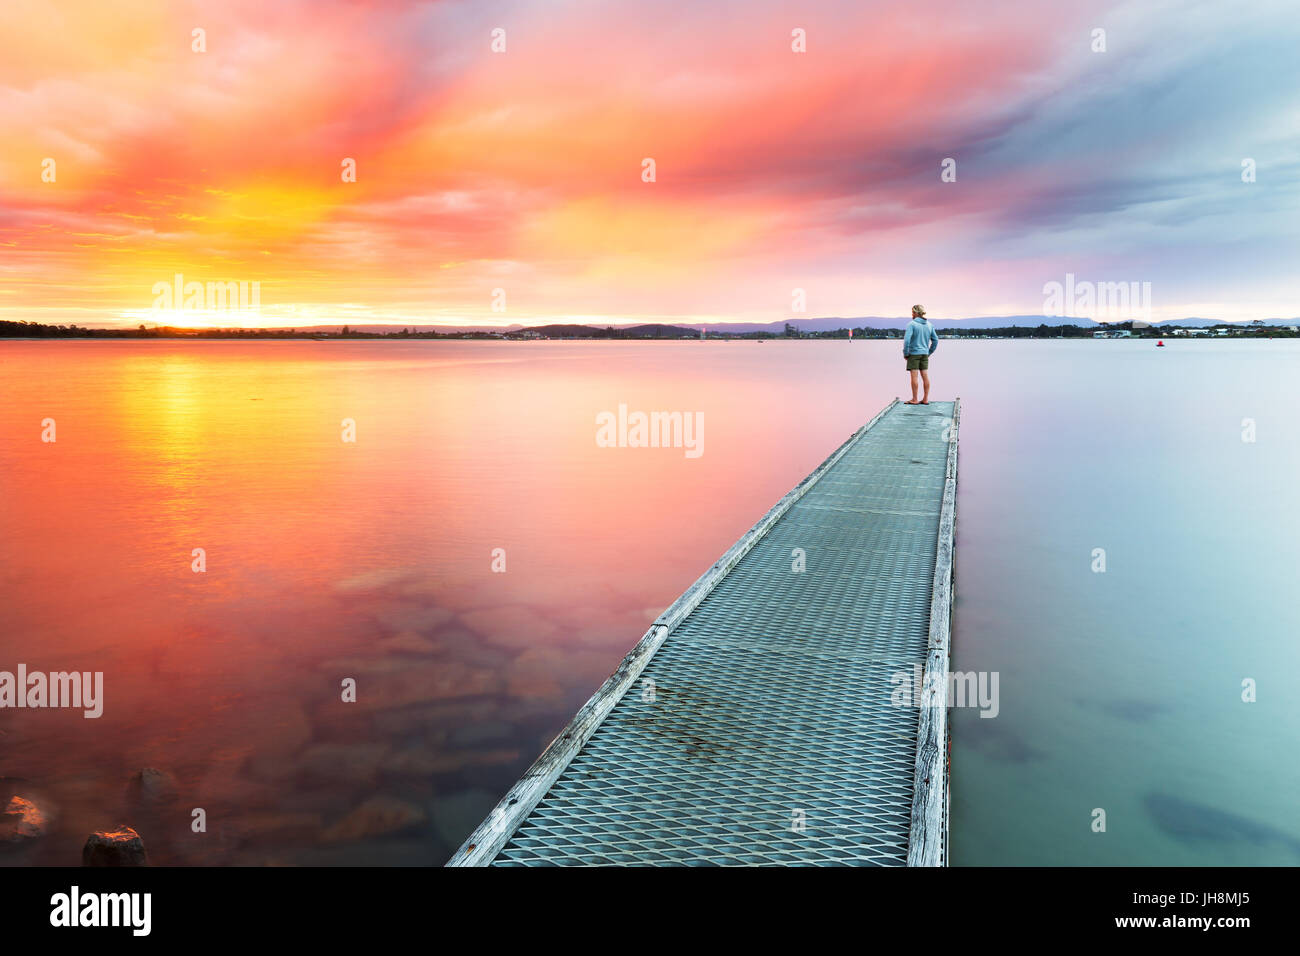 A person watches a beautiful, colourful sunset over the sea from the end of a small jetty. Stock Photo